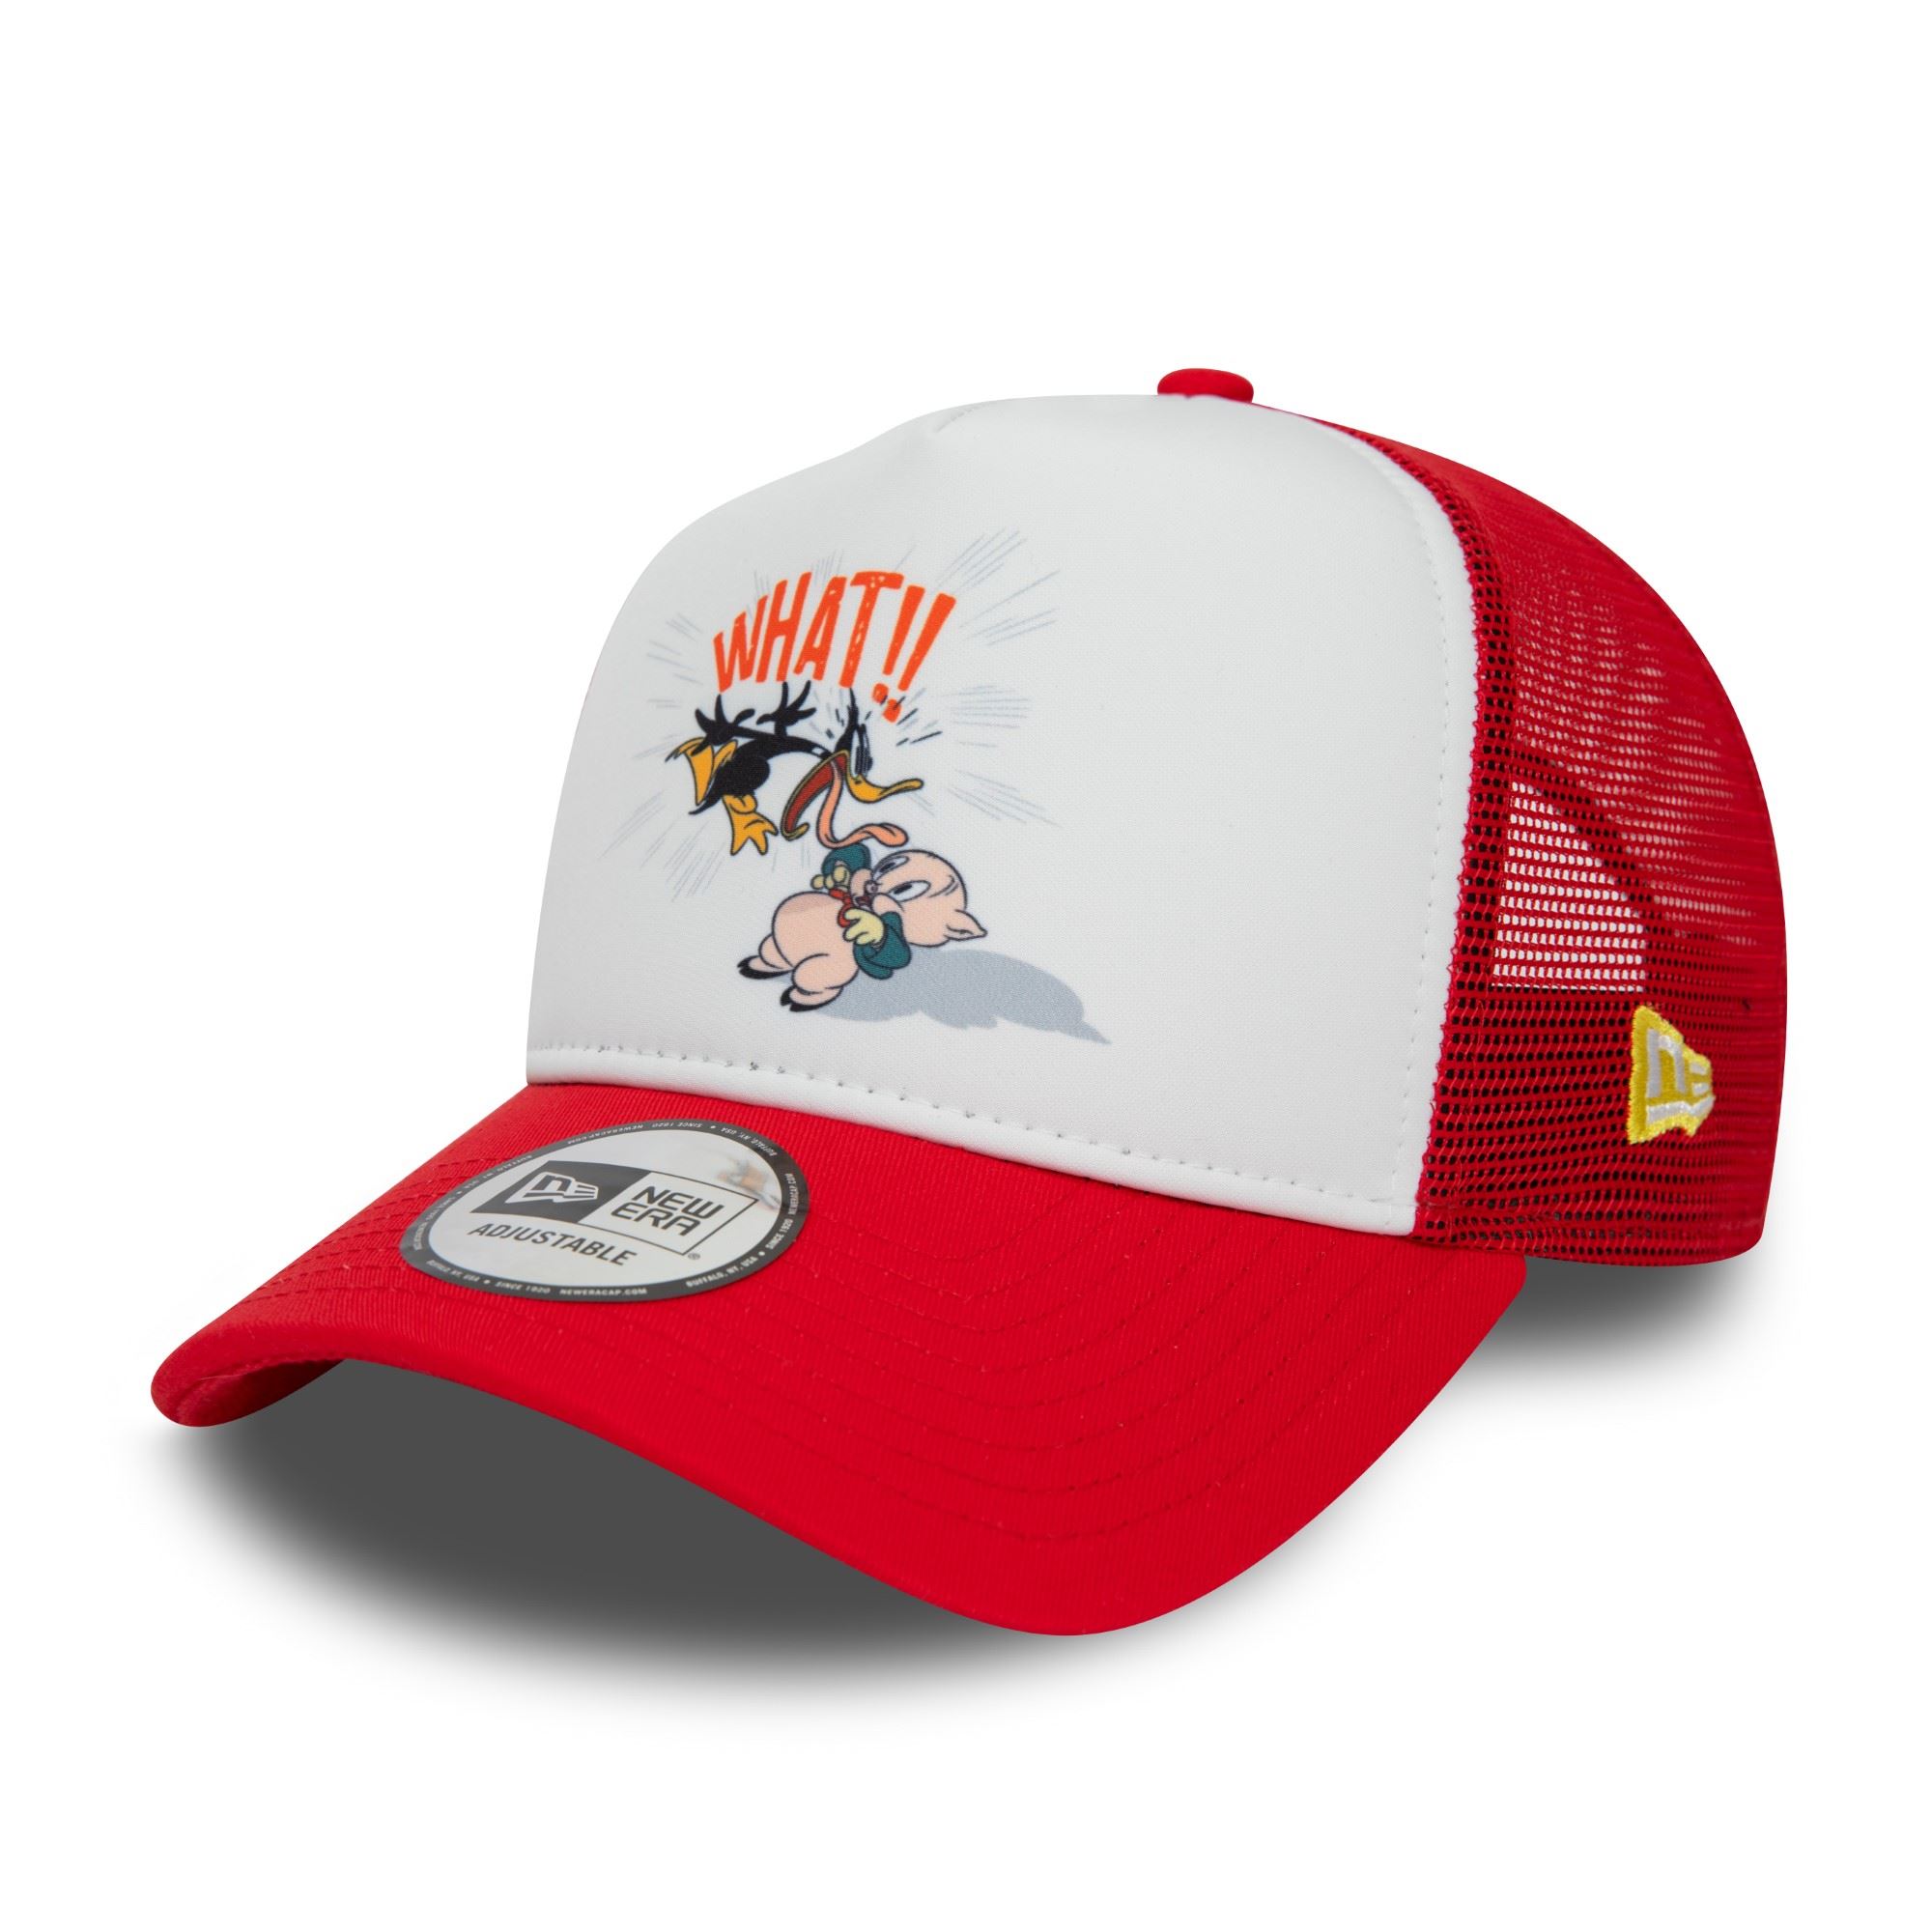 Daffy Duck and Porky Pig Looney Tunes Character Red White A-Frame Adjustable Trucker Cap New Era